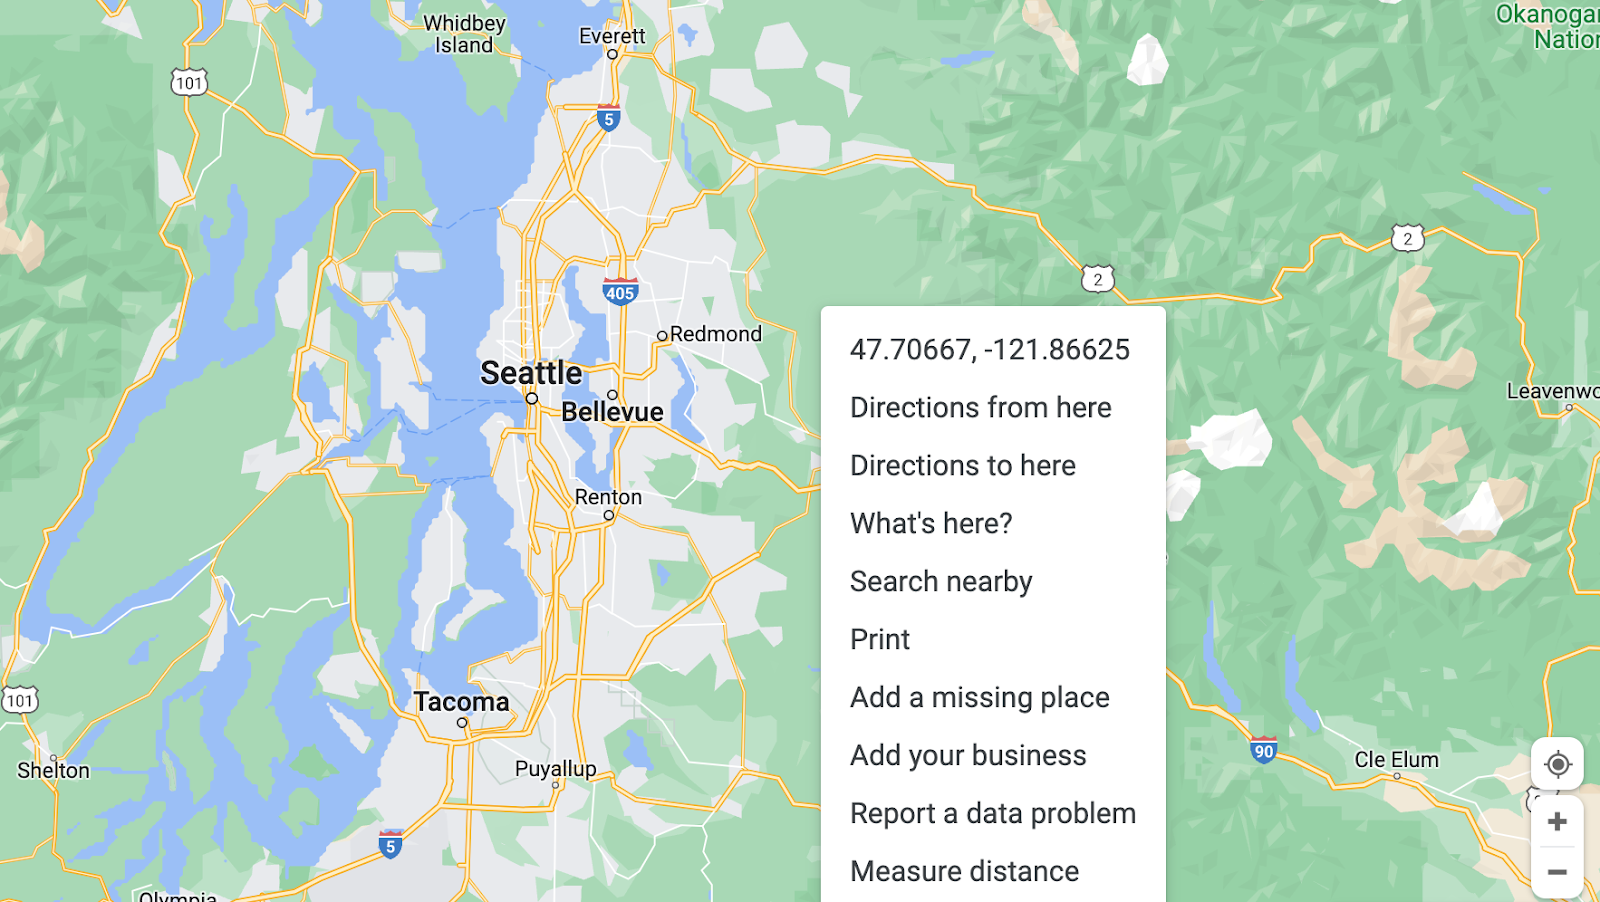 A Google Map image of the Seattle Area